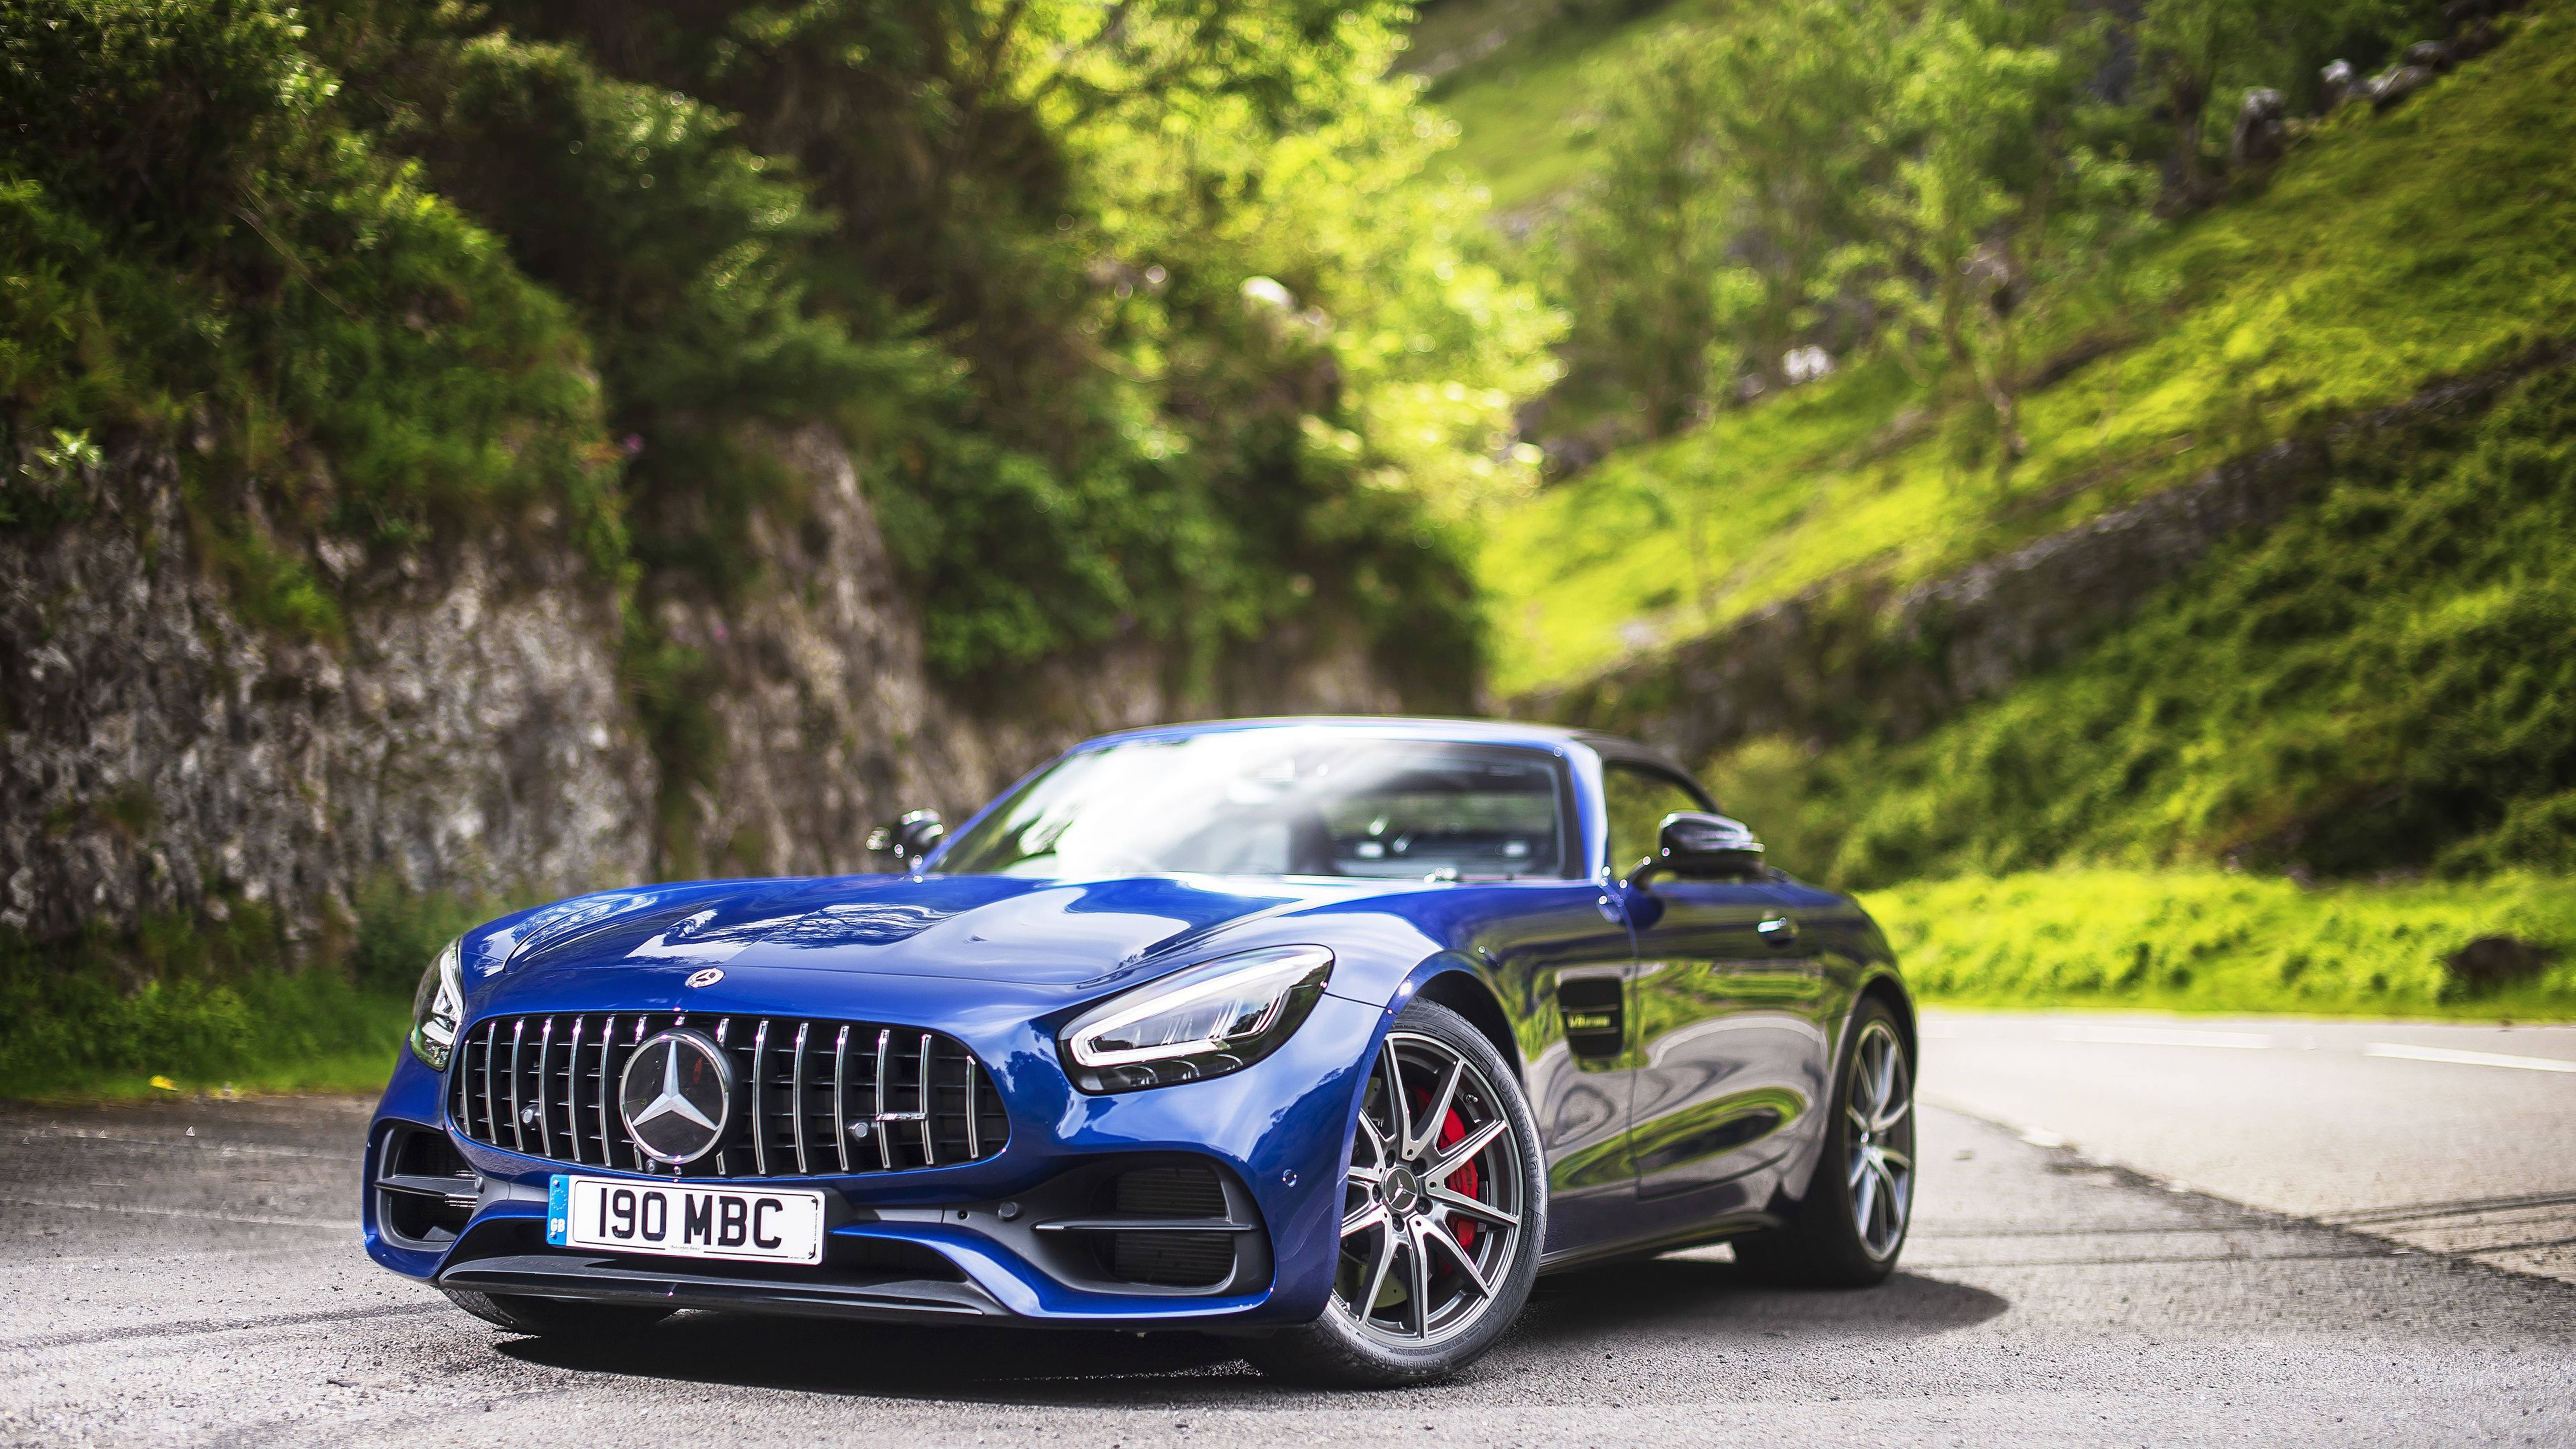 Mercedes AMG 4K Blue Aesthetic Car With Greenery Wallpaper